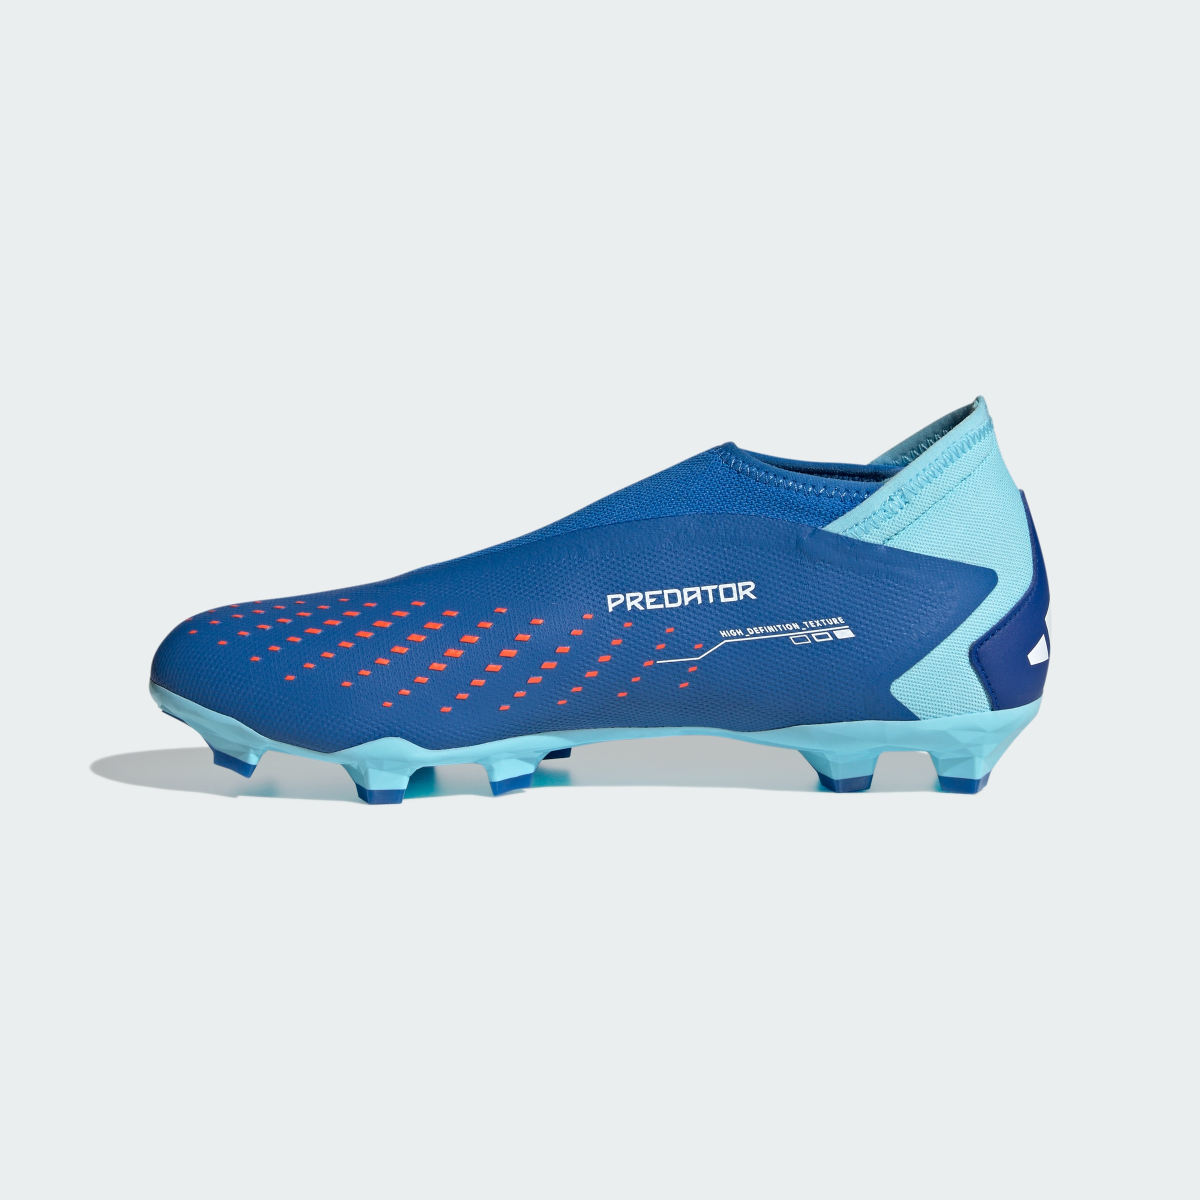 Adidas Predator Accuracy.3 Laceless Firm Ground Soccer Cleats. 7